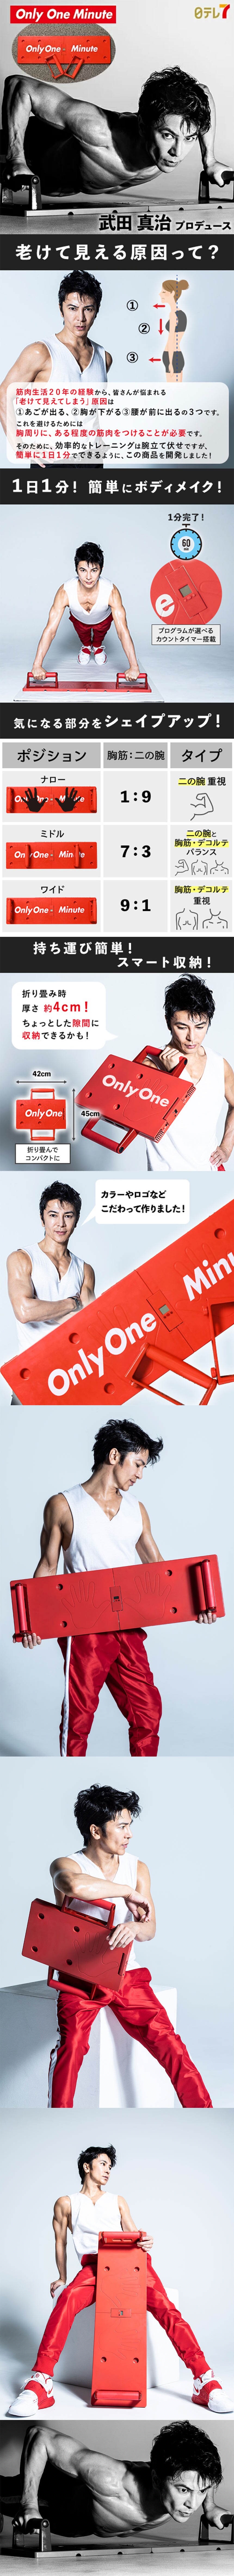 Only One Minute オンリーワンミニット武田真治プロデュース